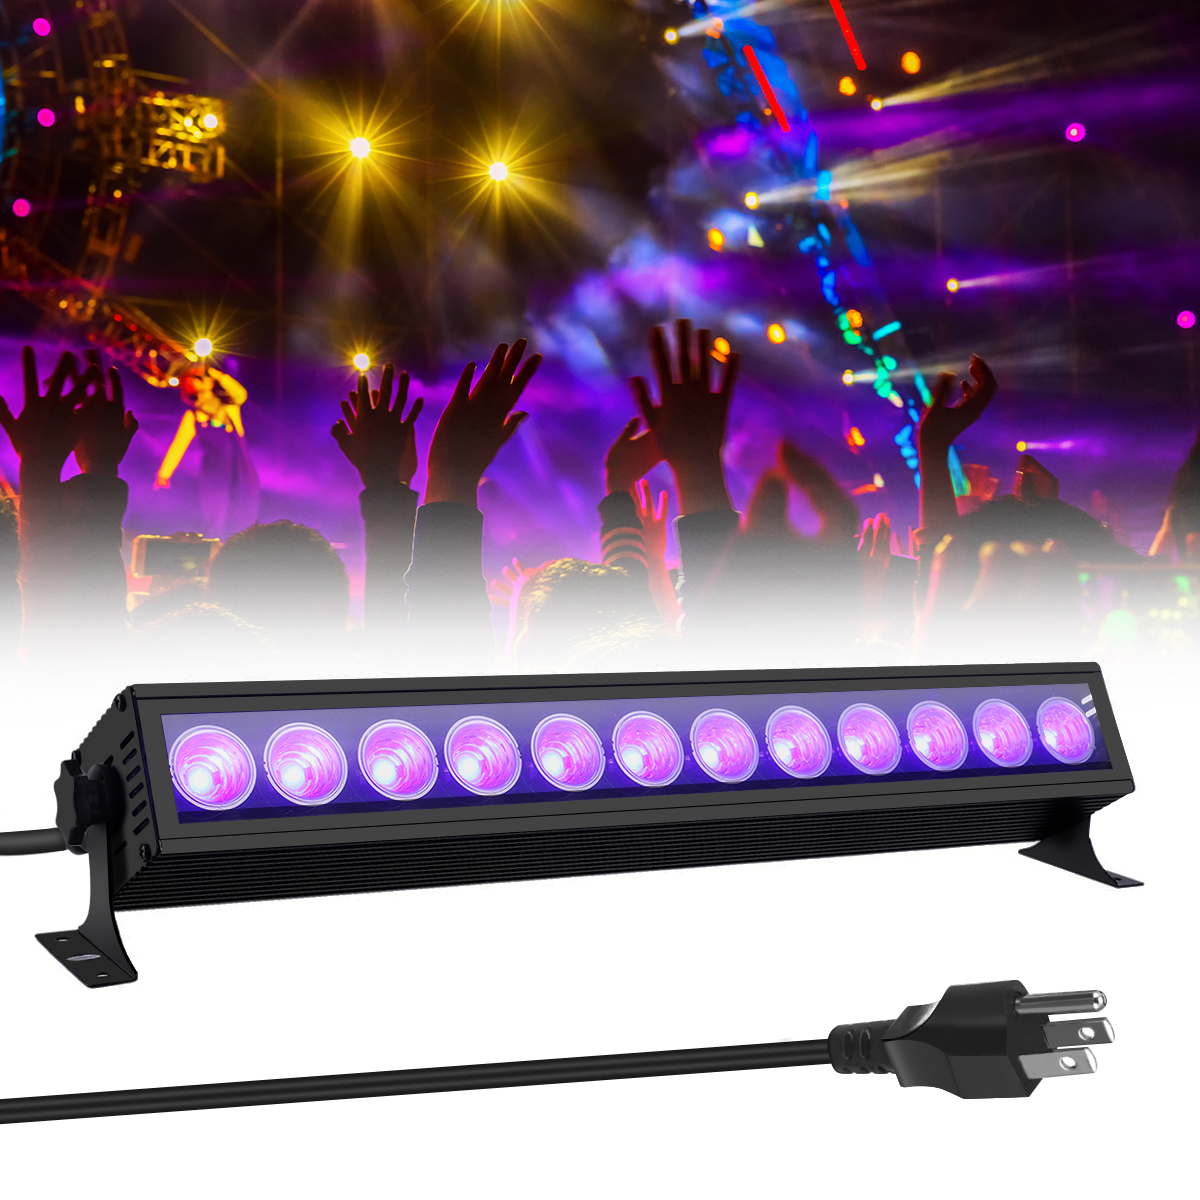 Find GLIME 12LED 36W UV LED Light Bar 360 Adjustable Wall Lights Lamp for DJ Stage Party for Sale on Gipsybee.com with cryptocurrencies